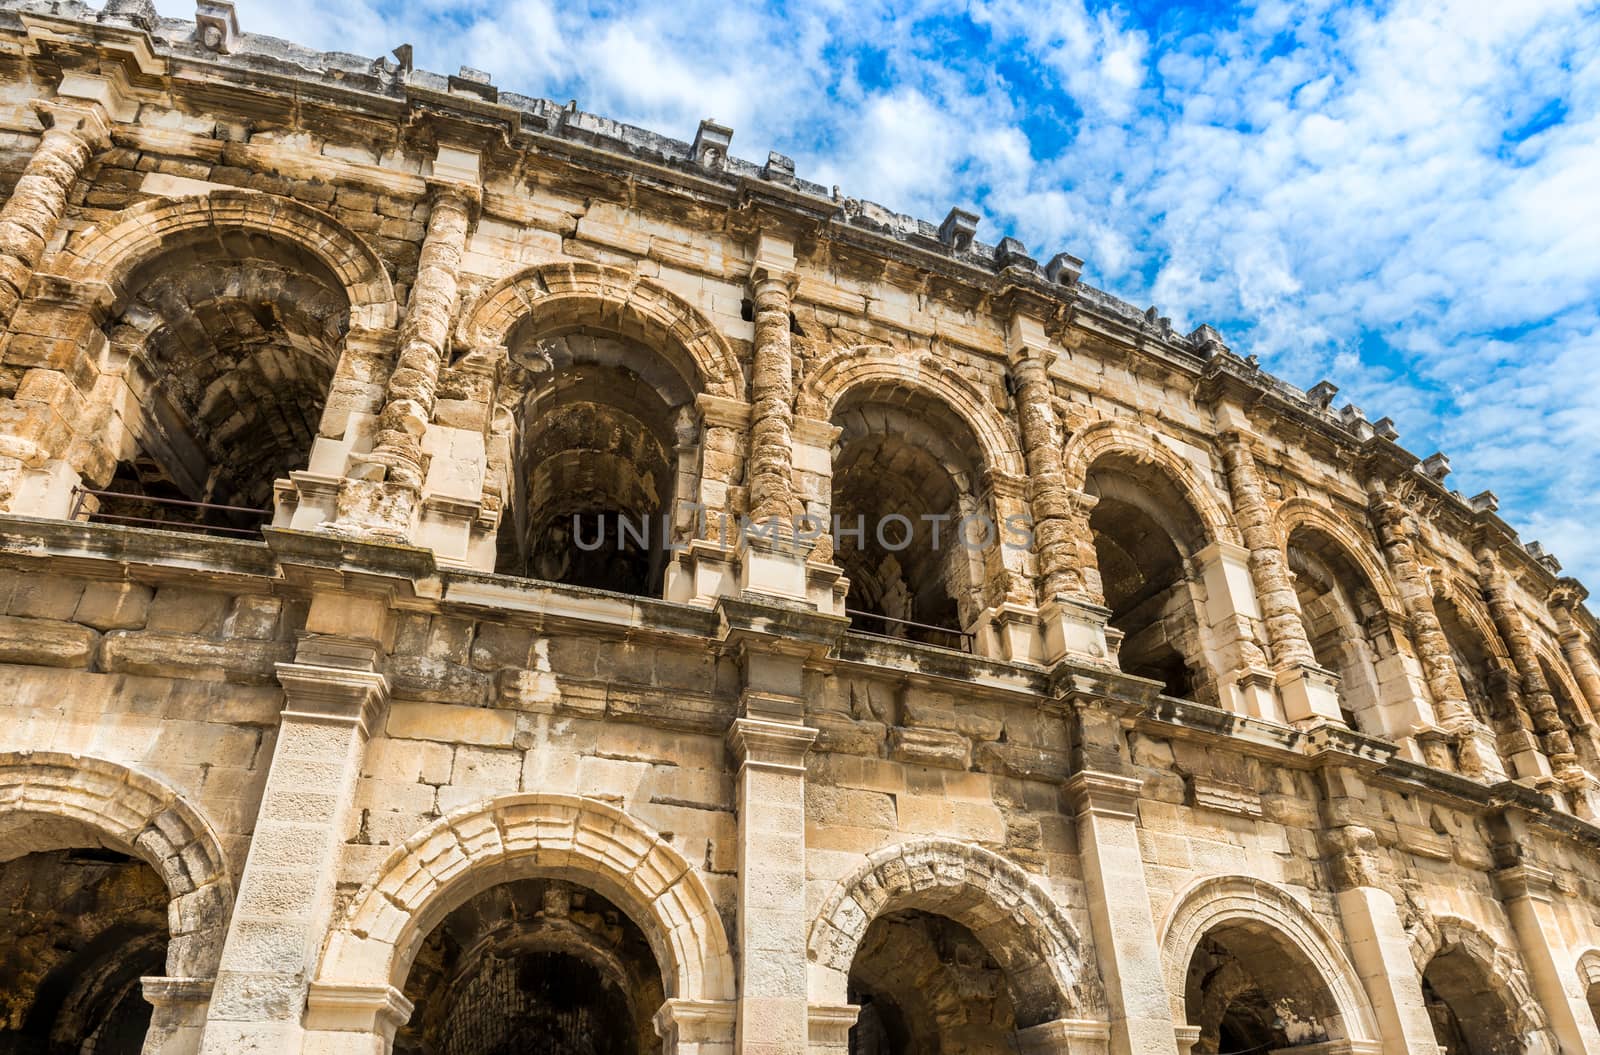 The arena of Nimes is a Roman amphitheater built towards the end of the 1st century in the French city of Nîmes, Gard in Occitani by Frederic